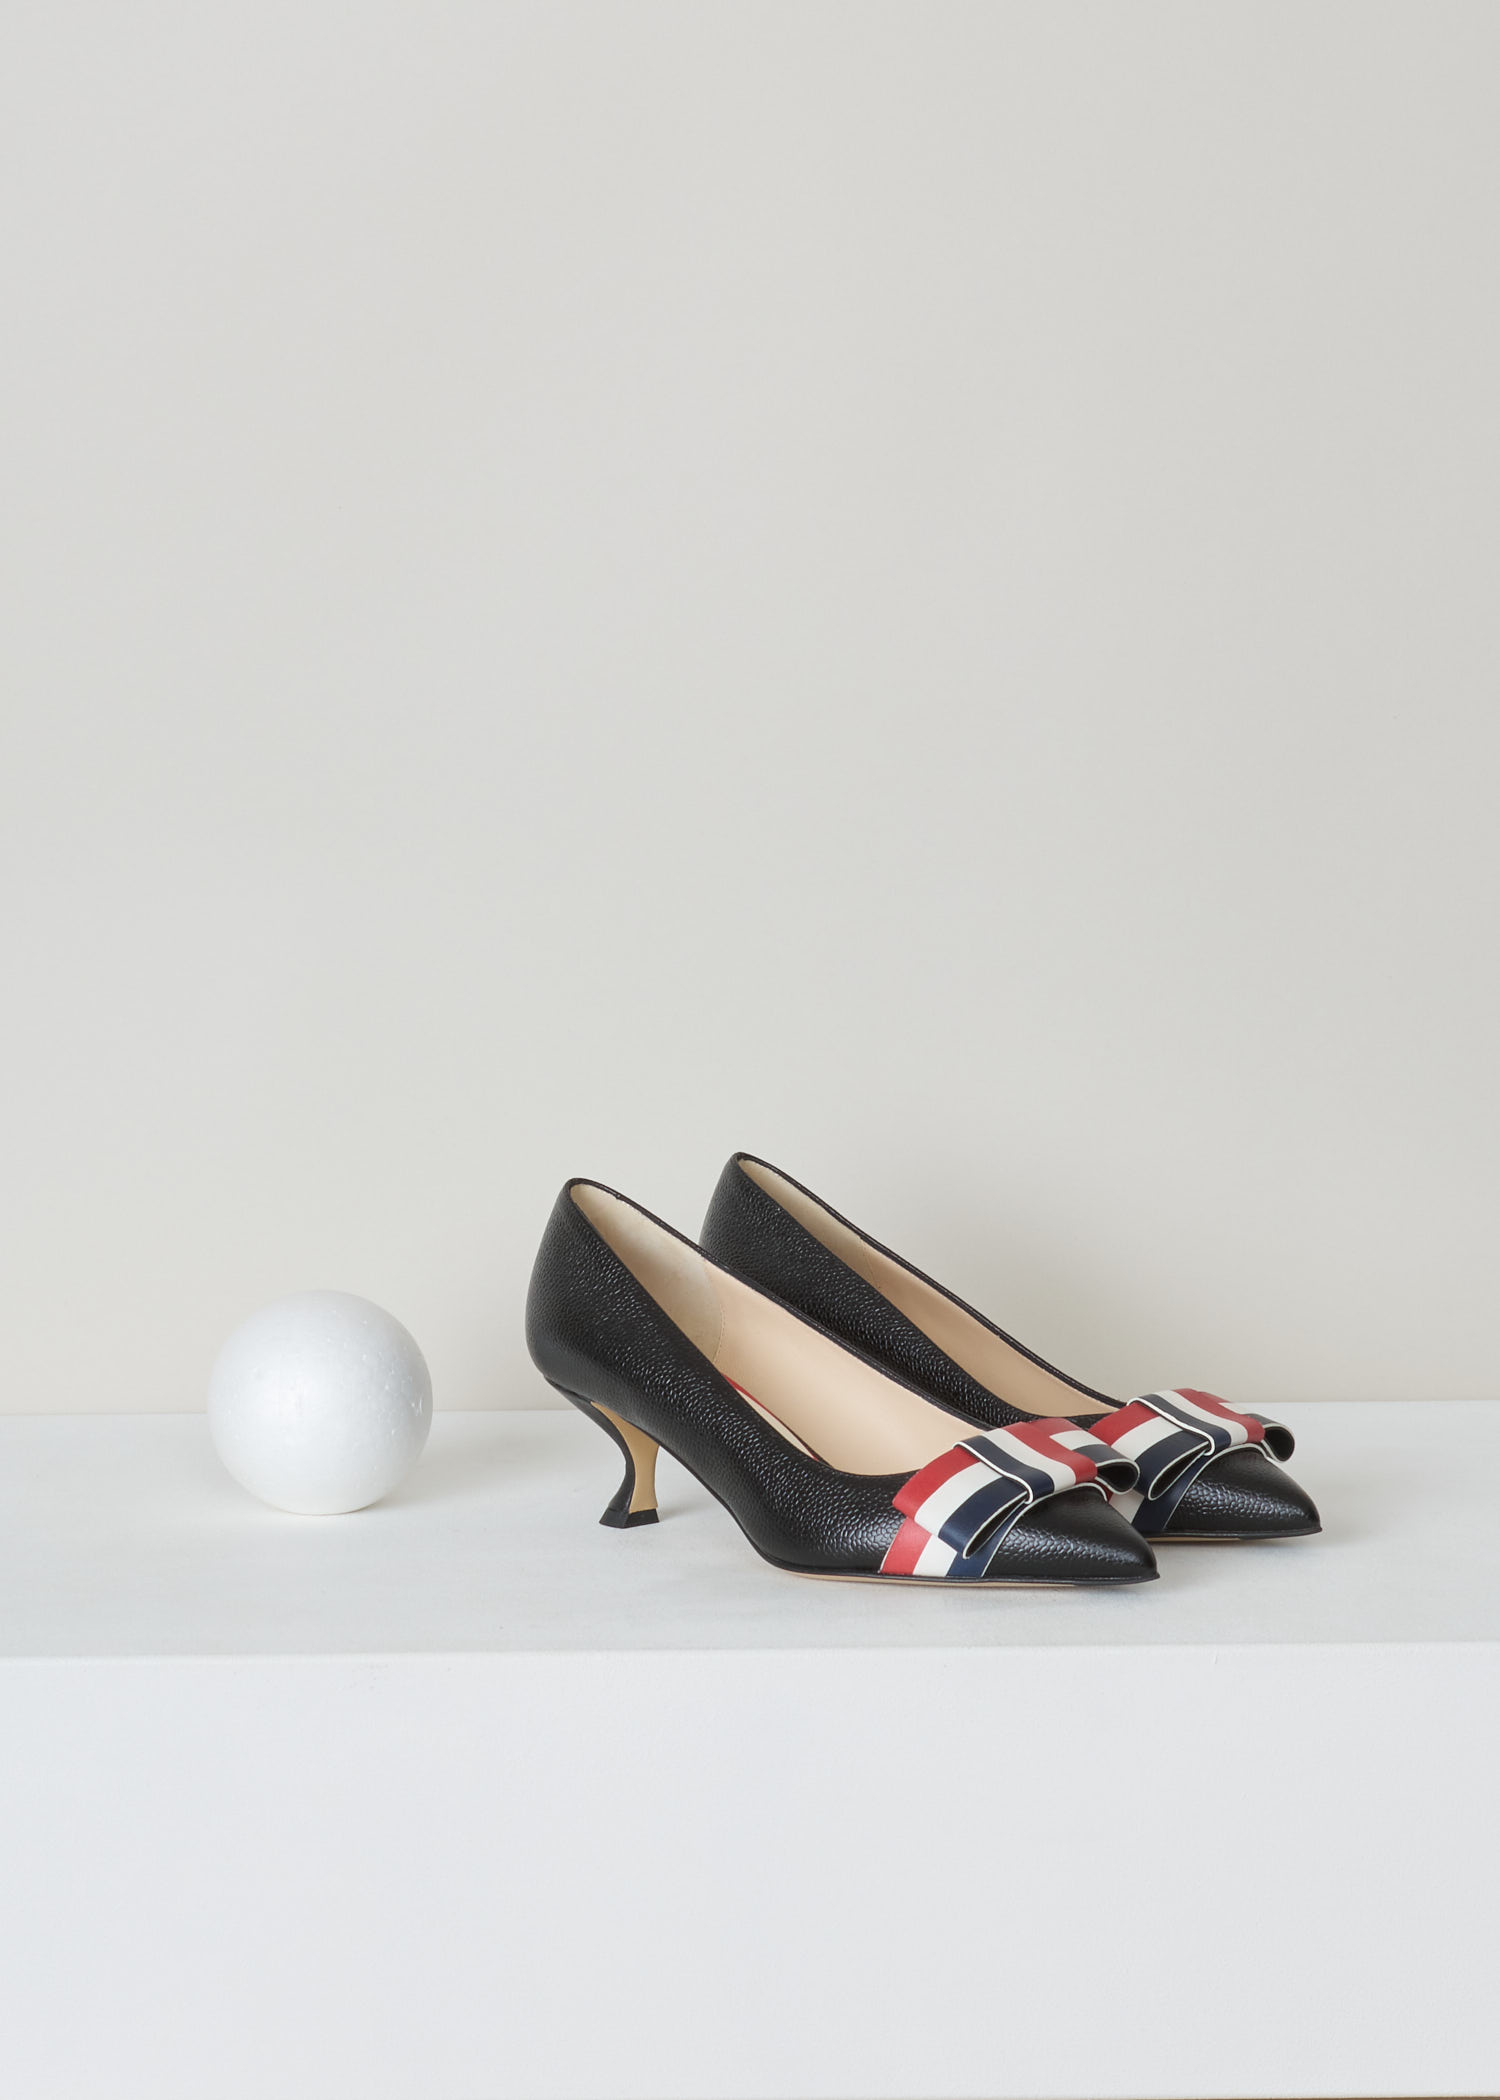 Thom Browne, Curved queenie heel pump, FFH121A_03542_001_black, black, front. High quality leather tooled until it got this beautiful pebble grain motive. As most of the Thom Browne items this gorgeous queenie heels pump also comes with the infamous rwb colours in the shape of a bow on the vamp of the shoe.   

heel height: 5 cm / 2 inch. 